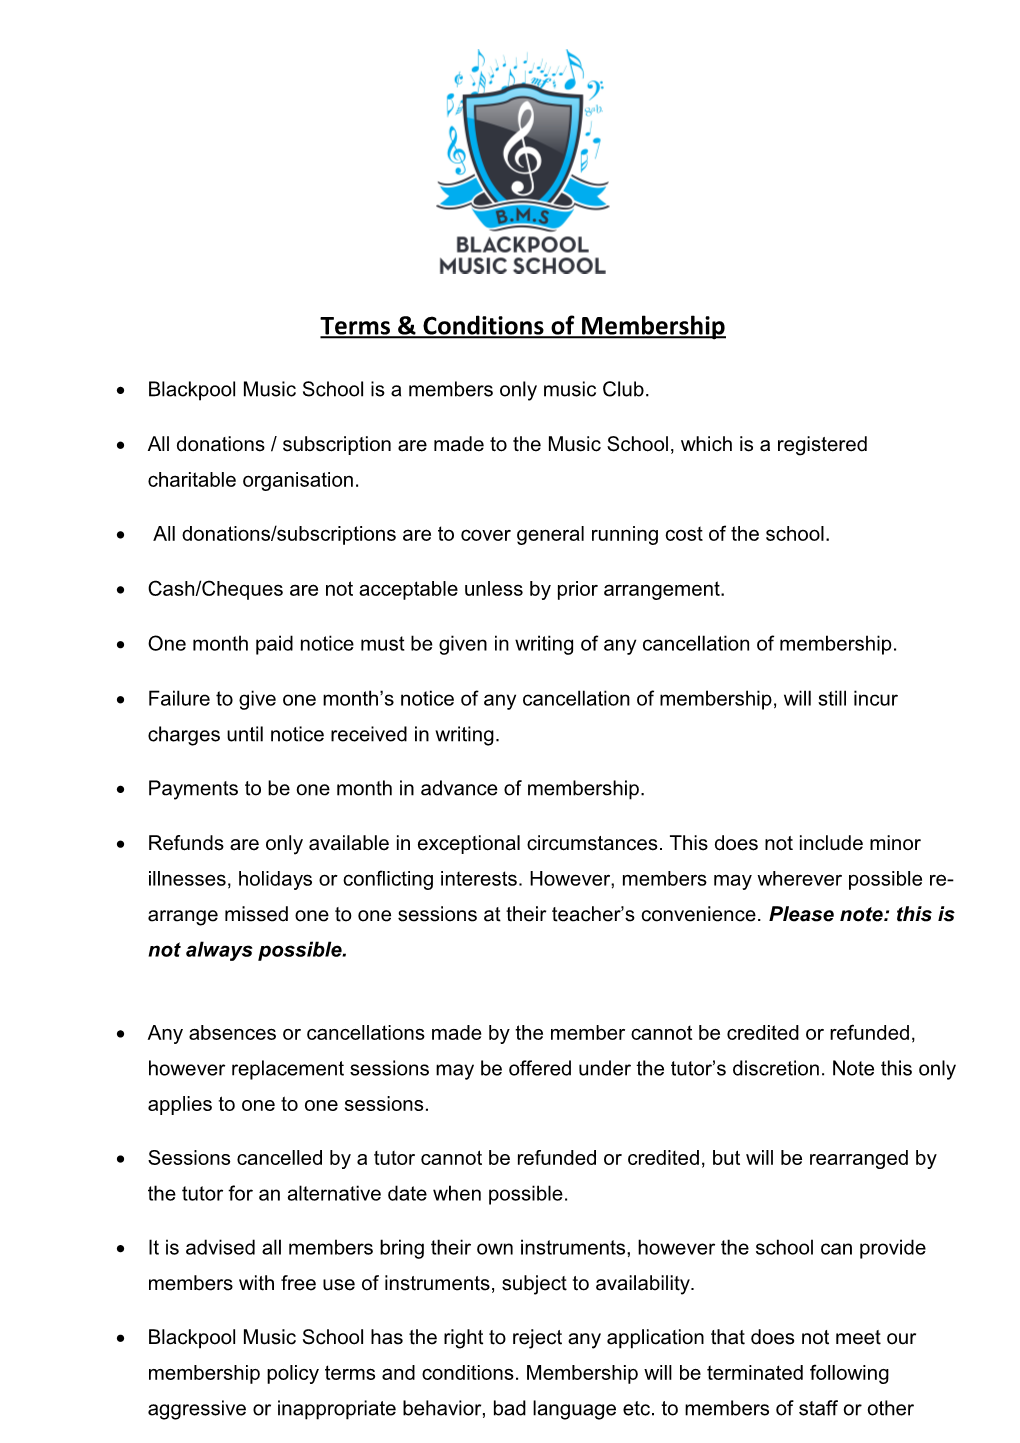 Terms & Conditions of Membership